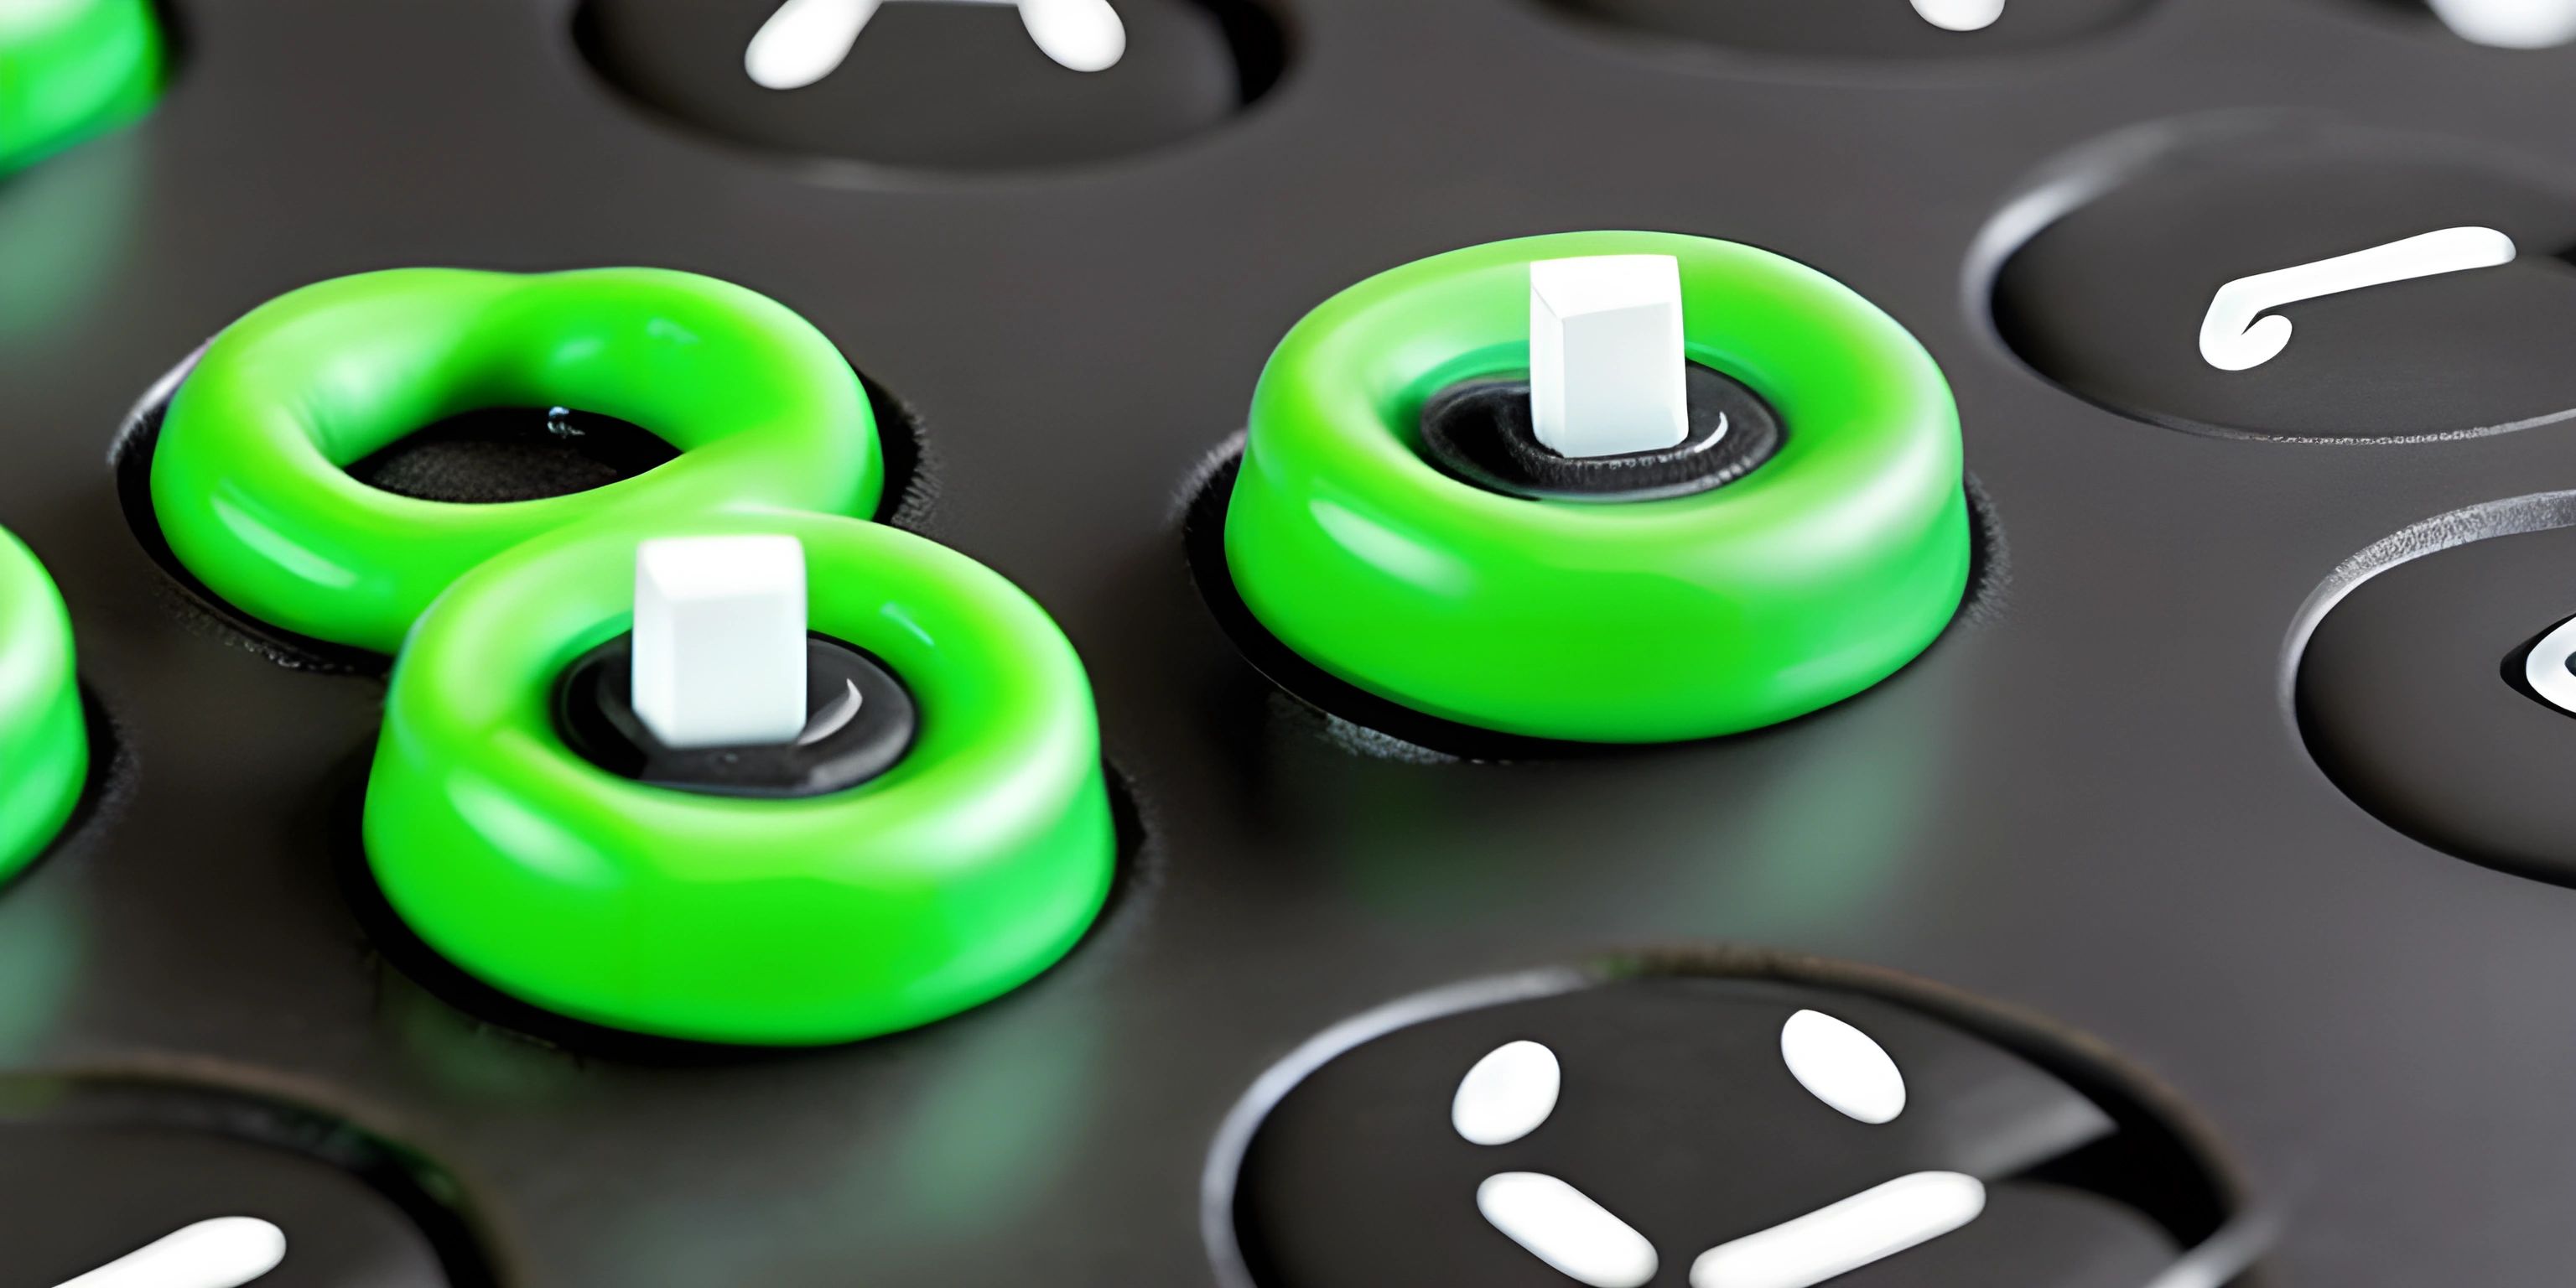 some green buttons and a green pair of eyeballs on a black keyboard and back